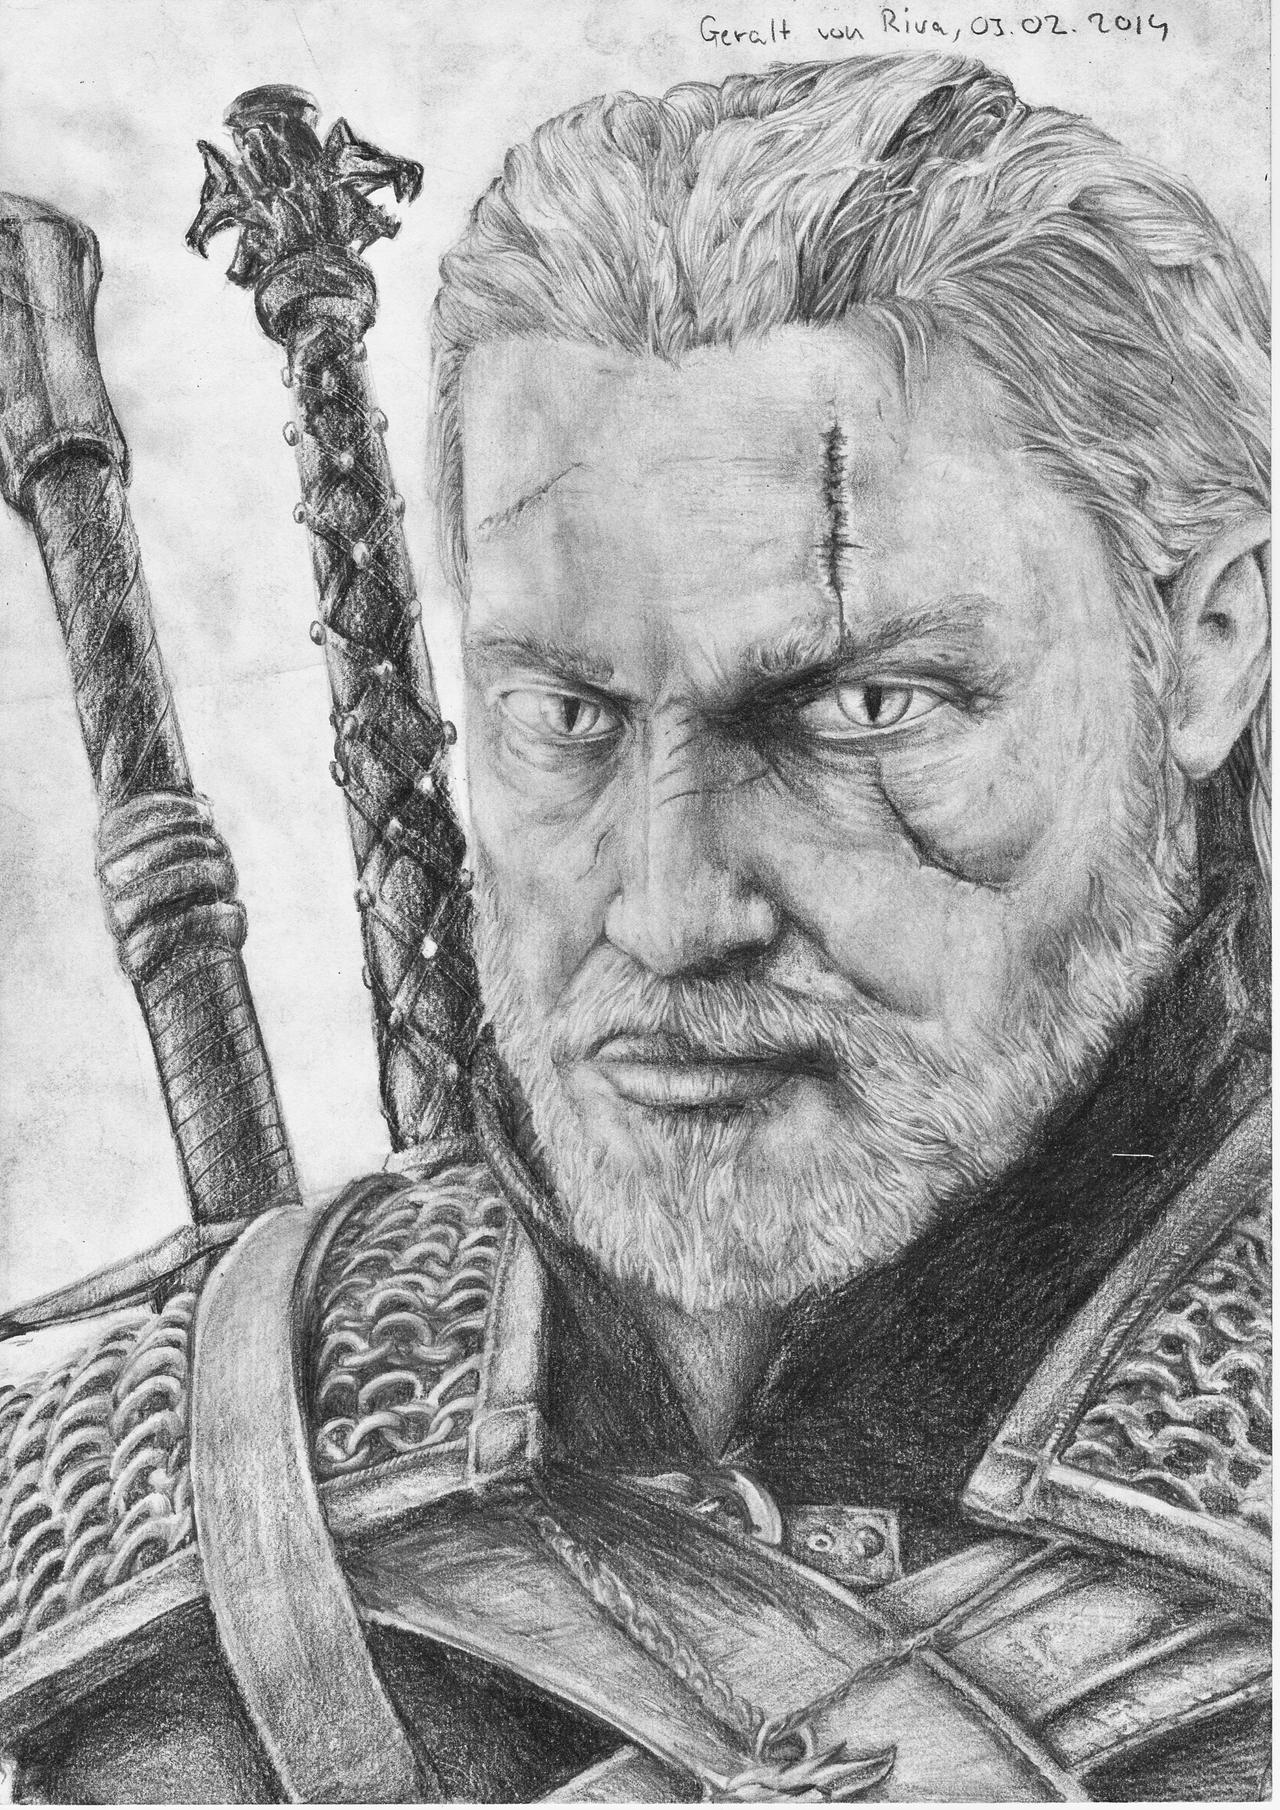 [OLD] Geralt of Rivia (The Witcher 3) Drawing by MonoFlax on DeviantArt